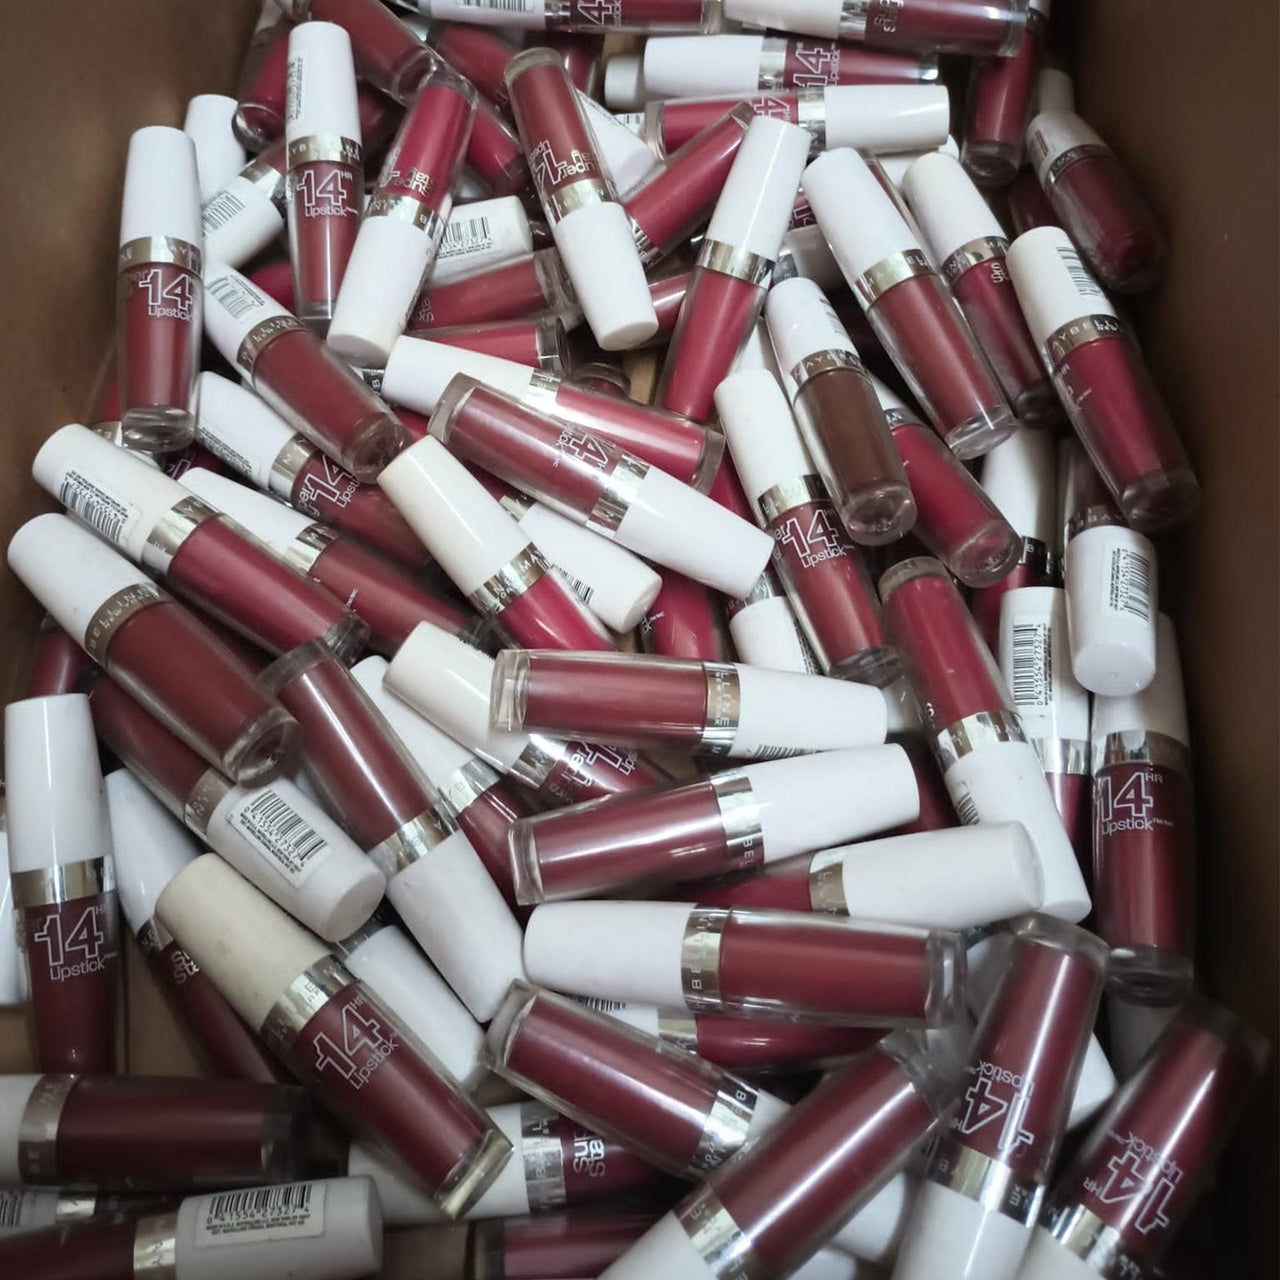 Maybelline 14 HR Lipstick Enduring Red (50 Pcs Box) - Discount Wholesalers Inc